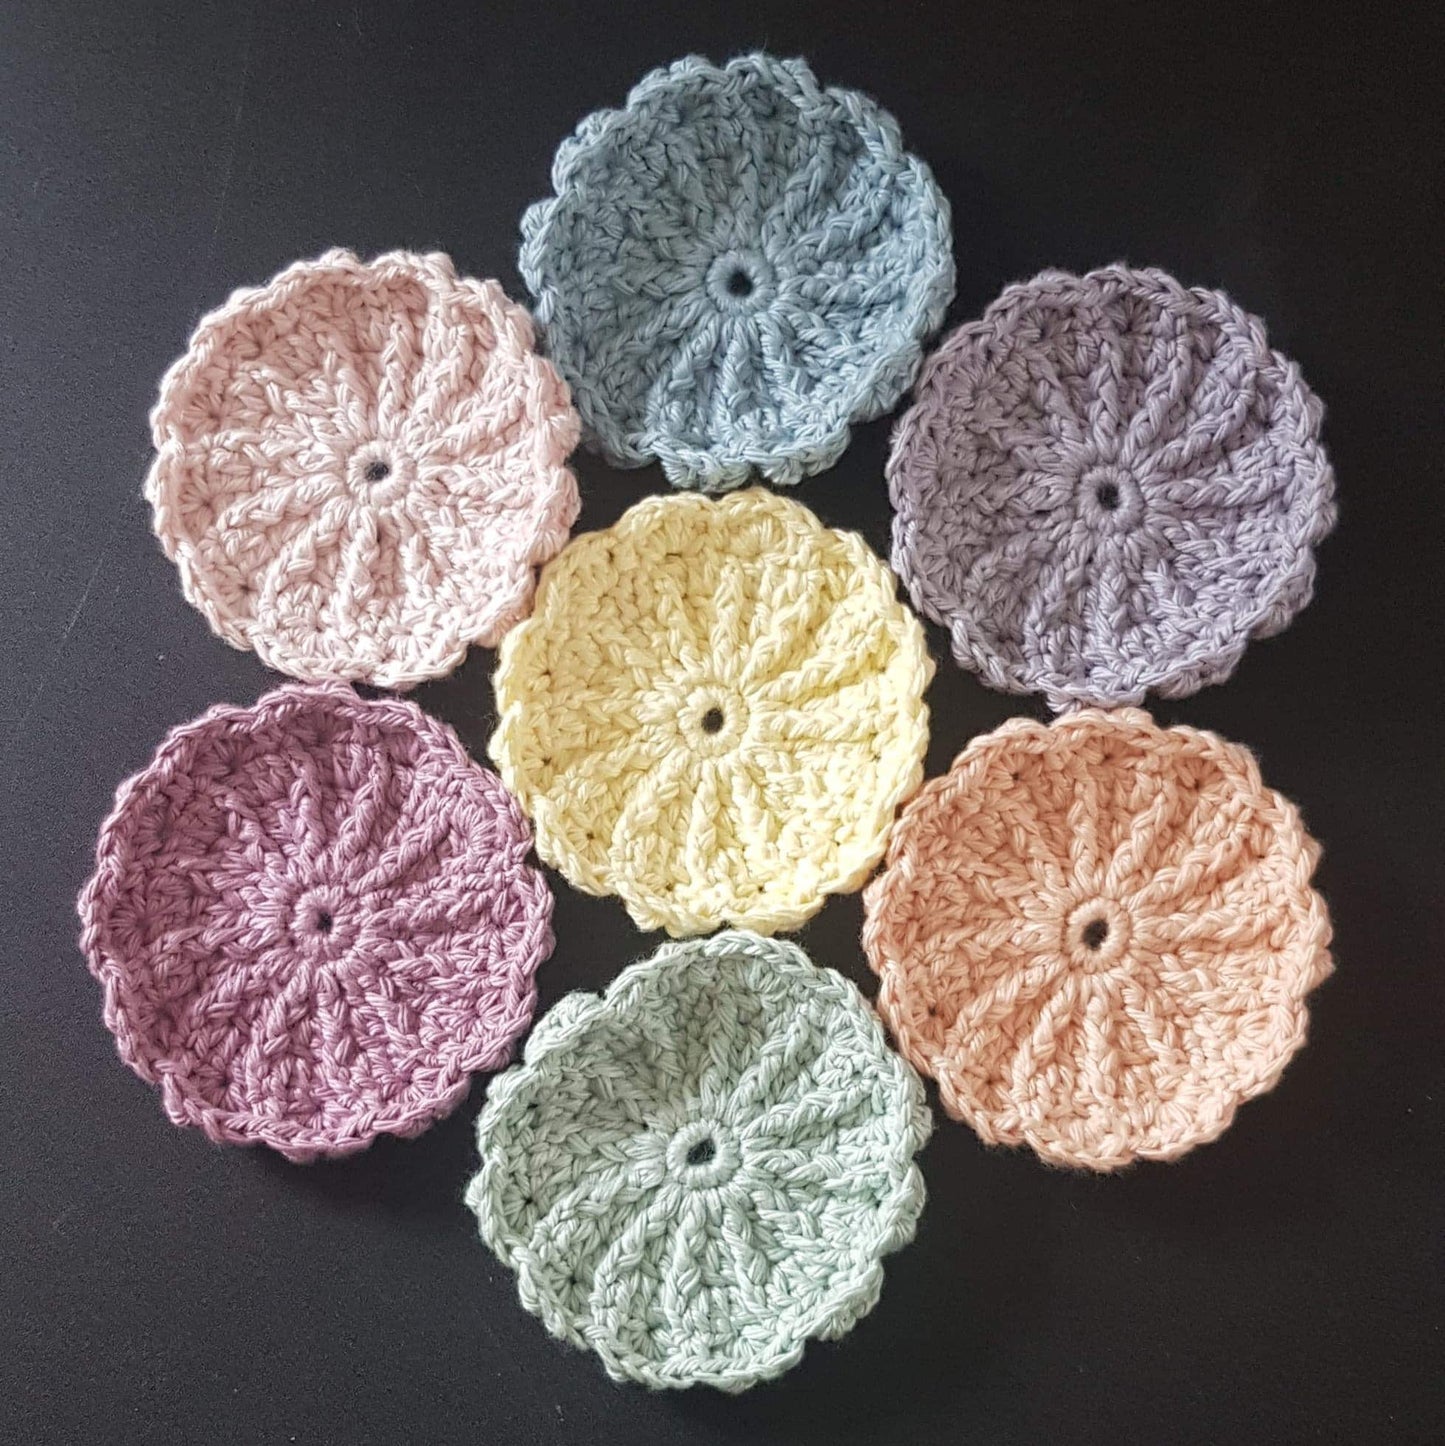 Reusable Makeup Cleaning Pads | Mesh Washing Bag | Eco Friendly | Cotton 7 Pack